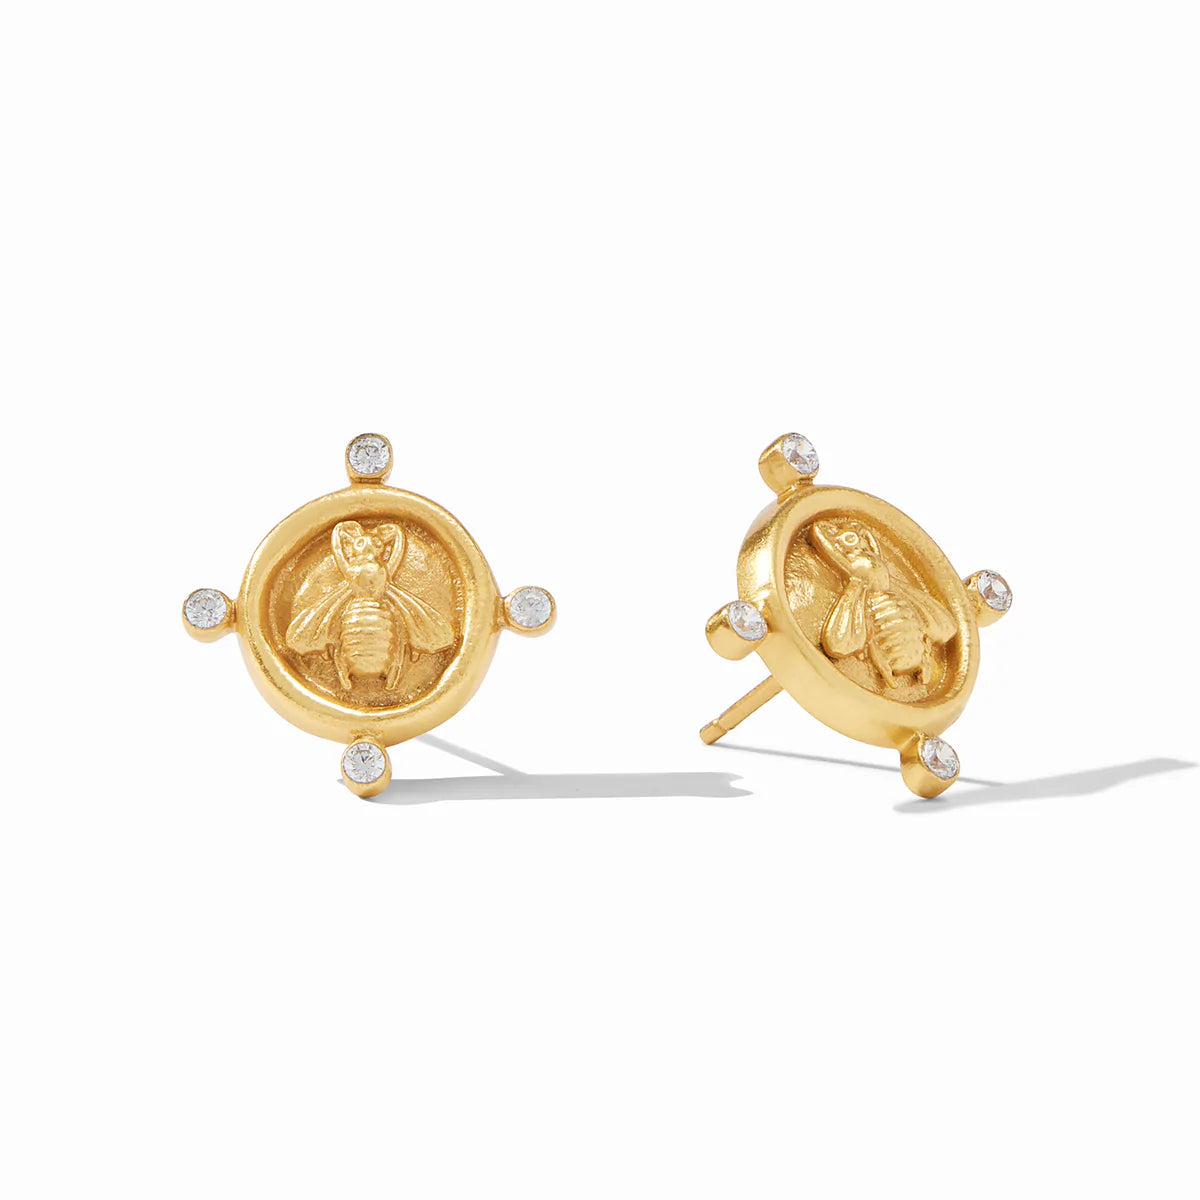 Bee Cameo Stud by Julie Vos. Design features gold bees skillfully carved and surrounded by 4 glittering CZ stones. Shop at The Painted Cottage in Edgewater, MD.